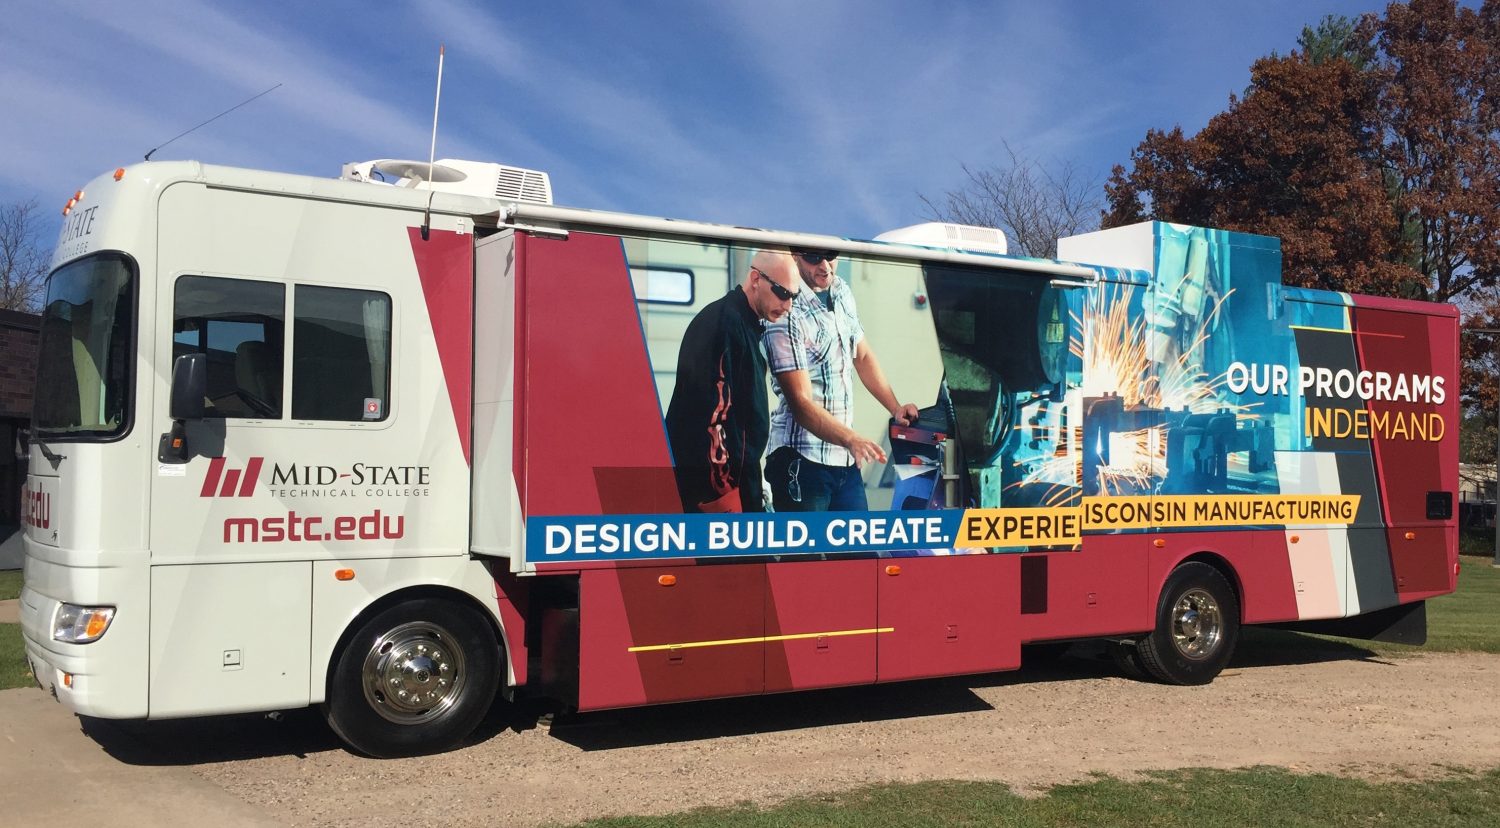 Mid-State Tehcnical College's mobile MIKE lab provides an interactive manufacturing experience.